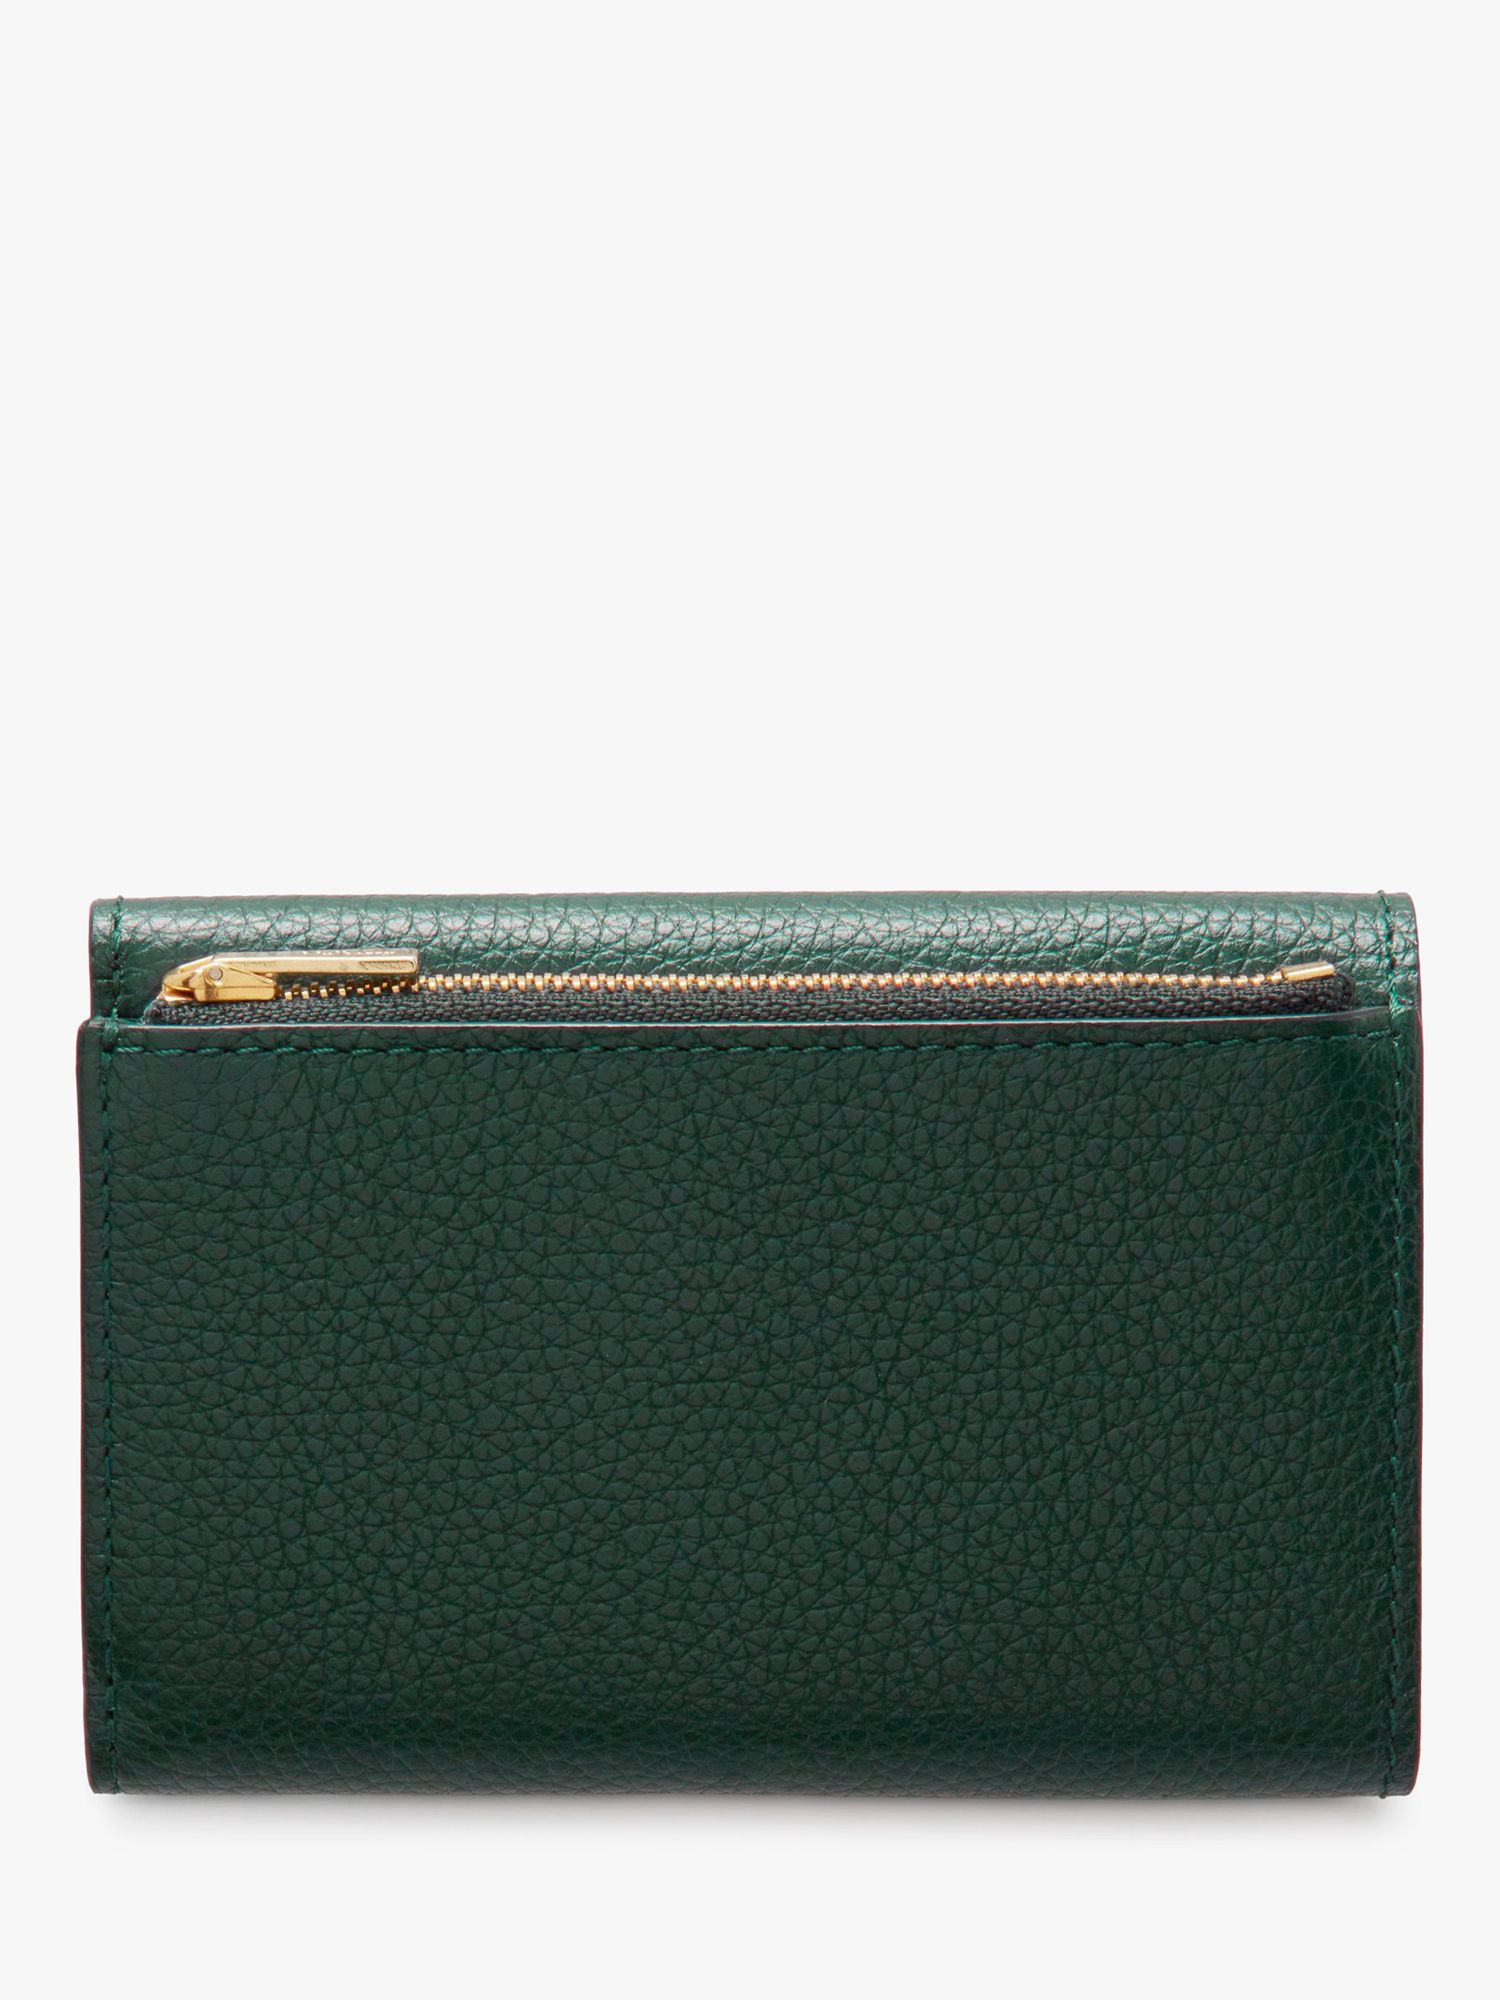 Mulberry Folded Multi-Card Small Classic Grain Leather Wallet, Mulberry Green